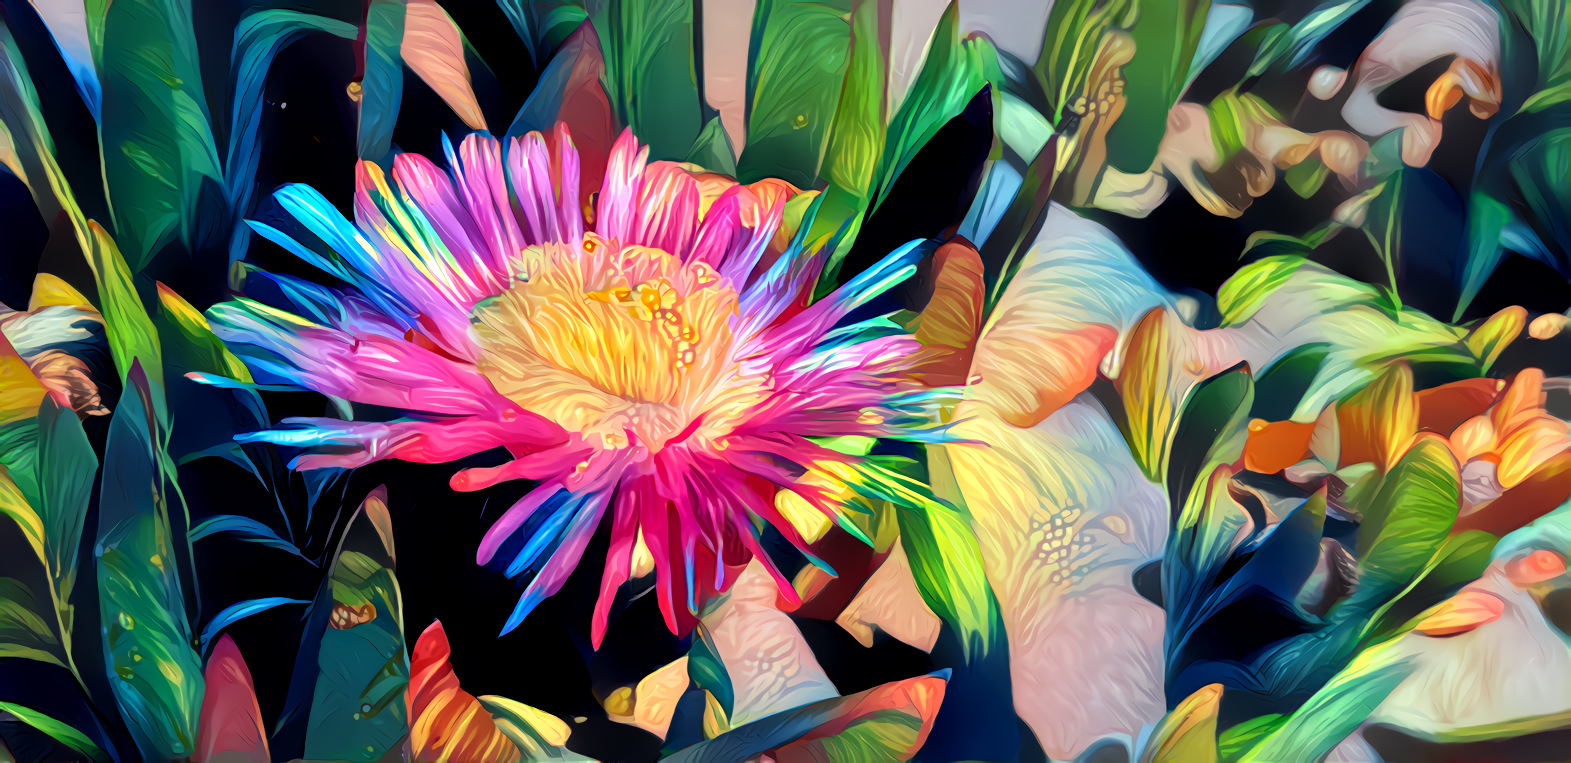 Flower - painty